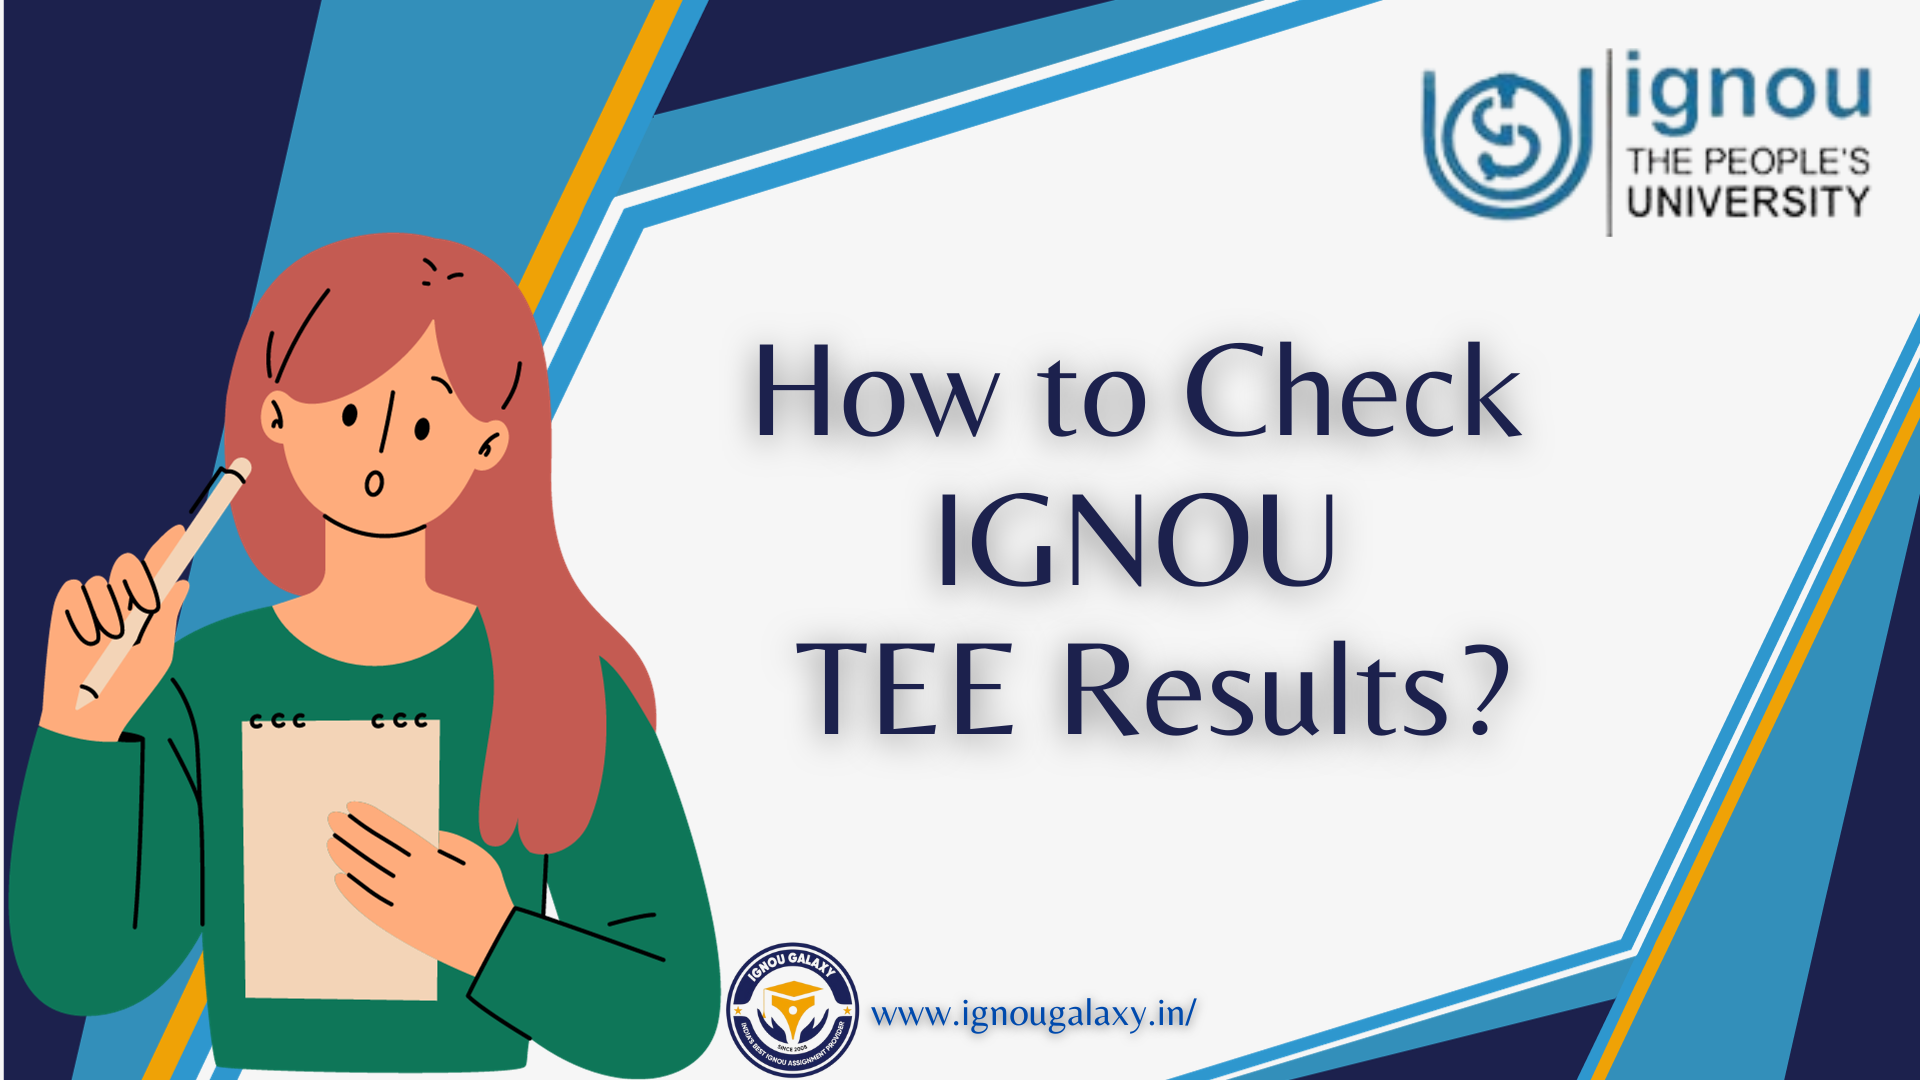 IGNOU TEE RESULTS